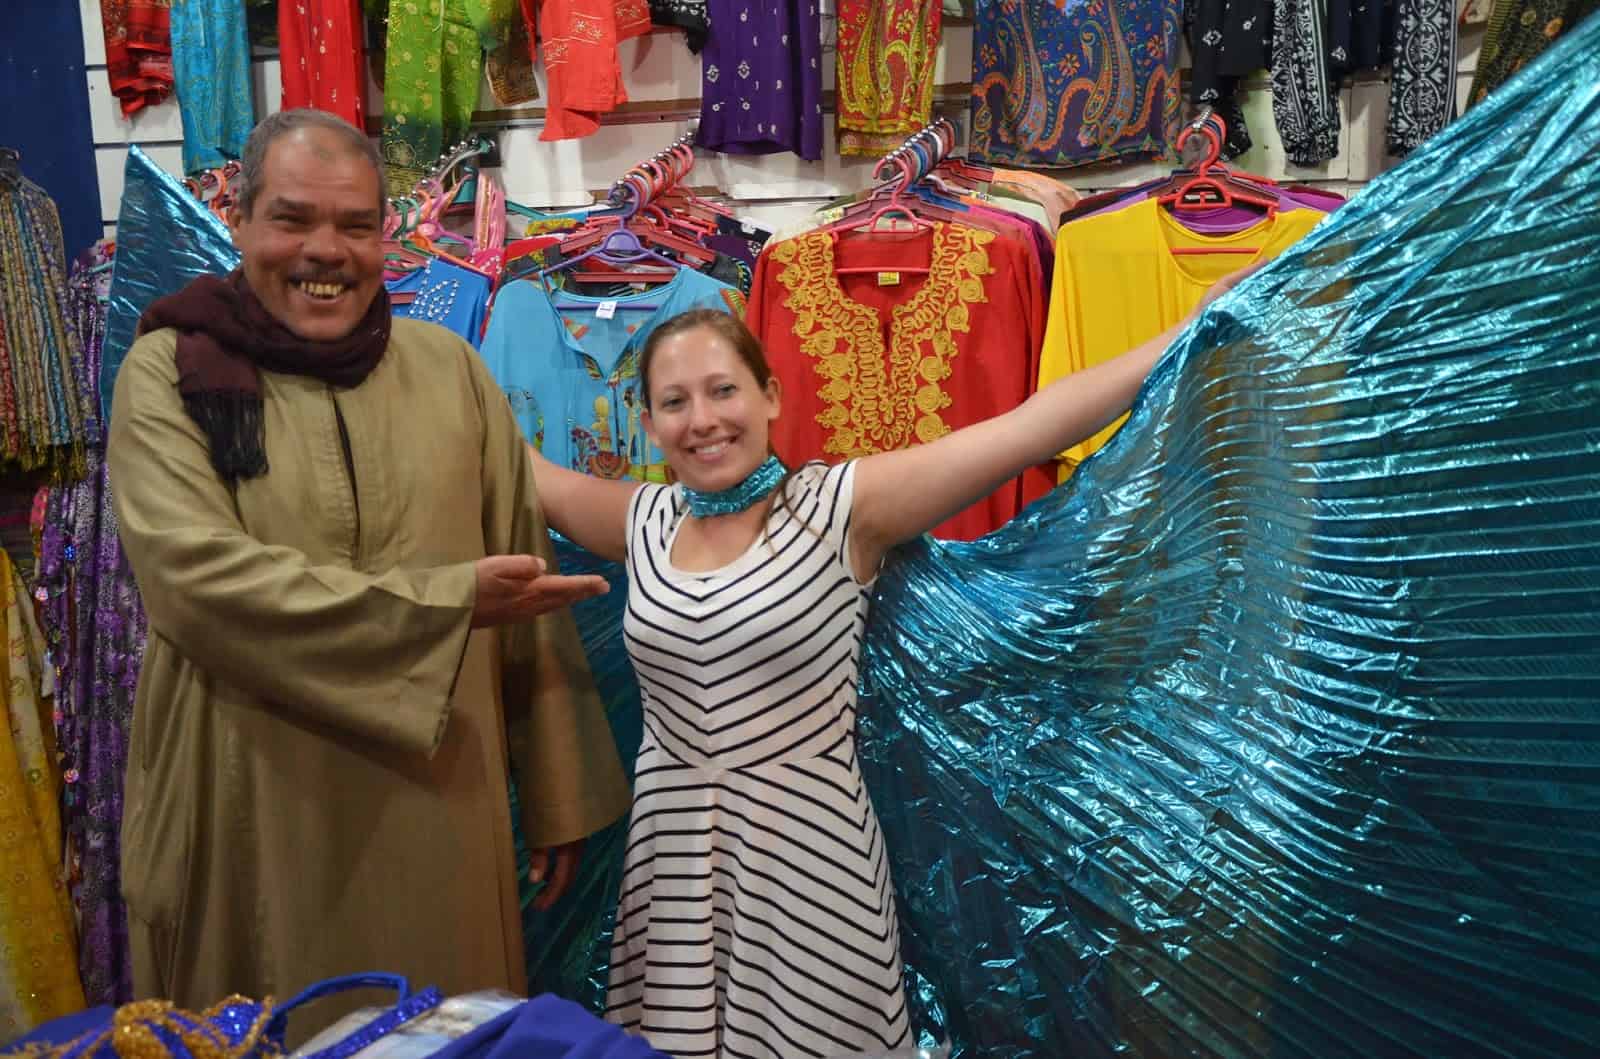 Tyra with her purchase at the souk in Sharm el-Sheikh, Egypt